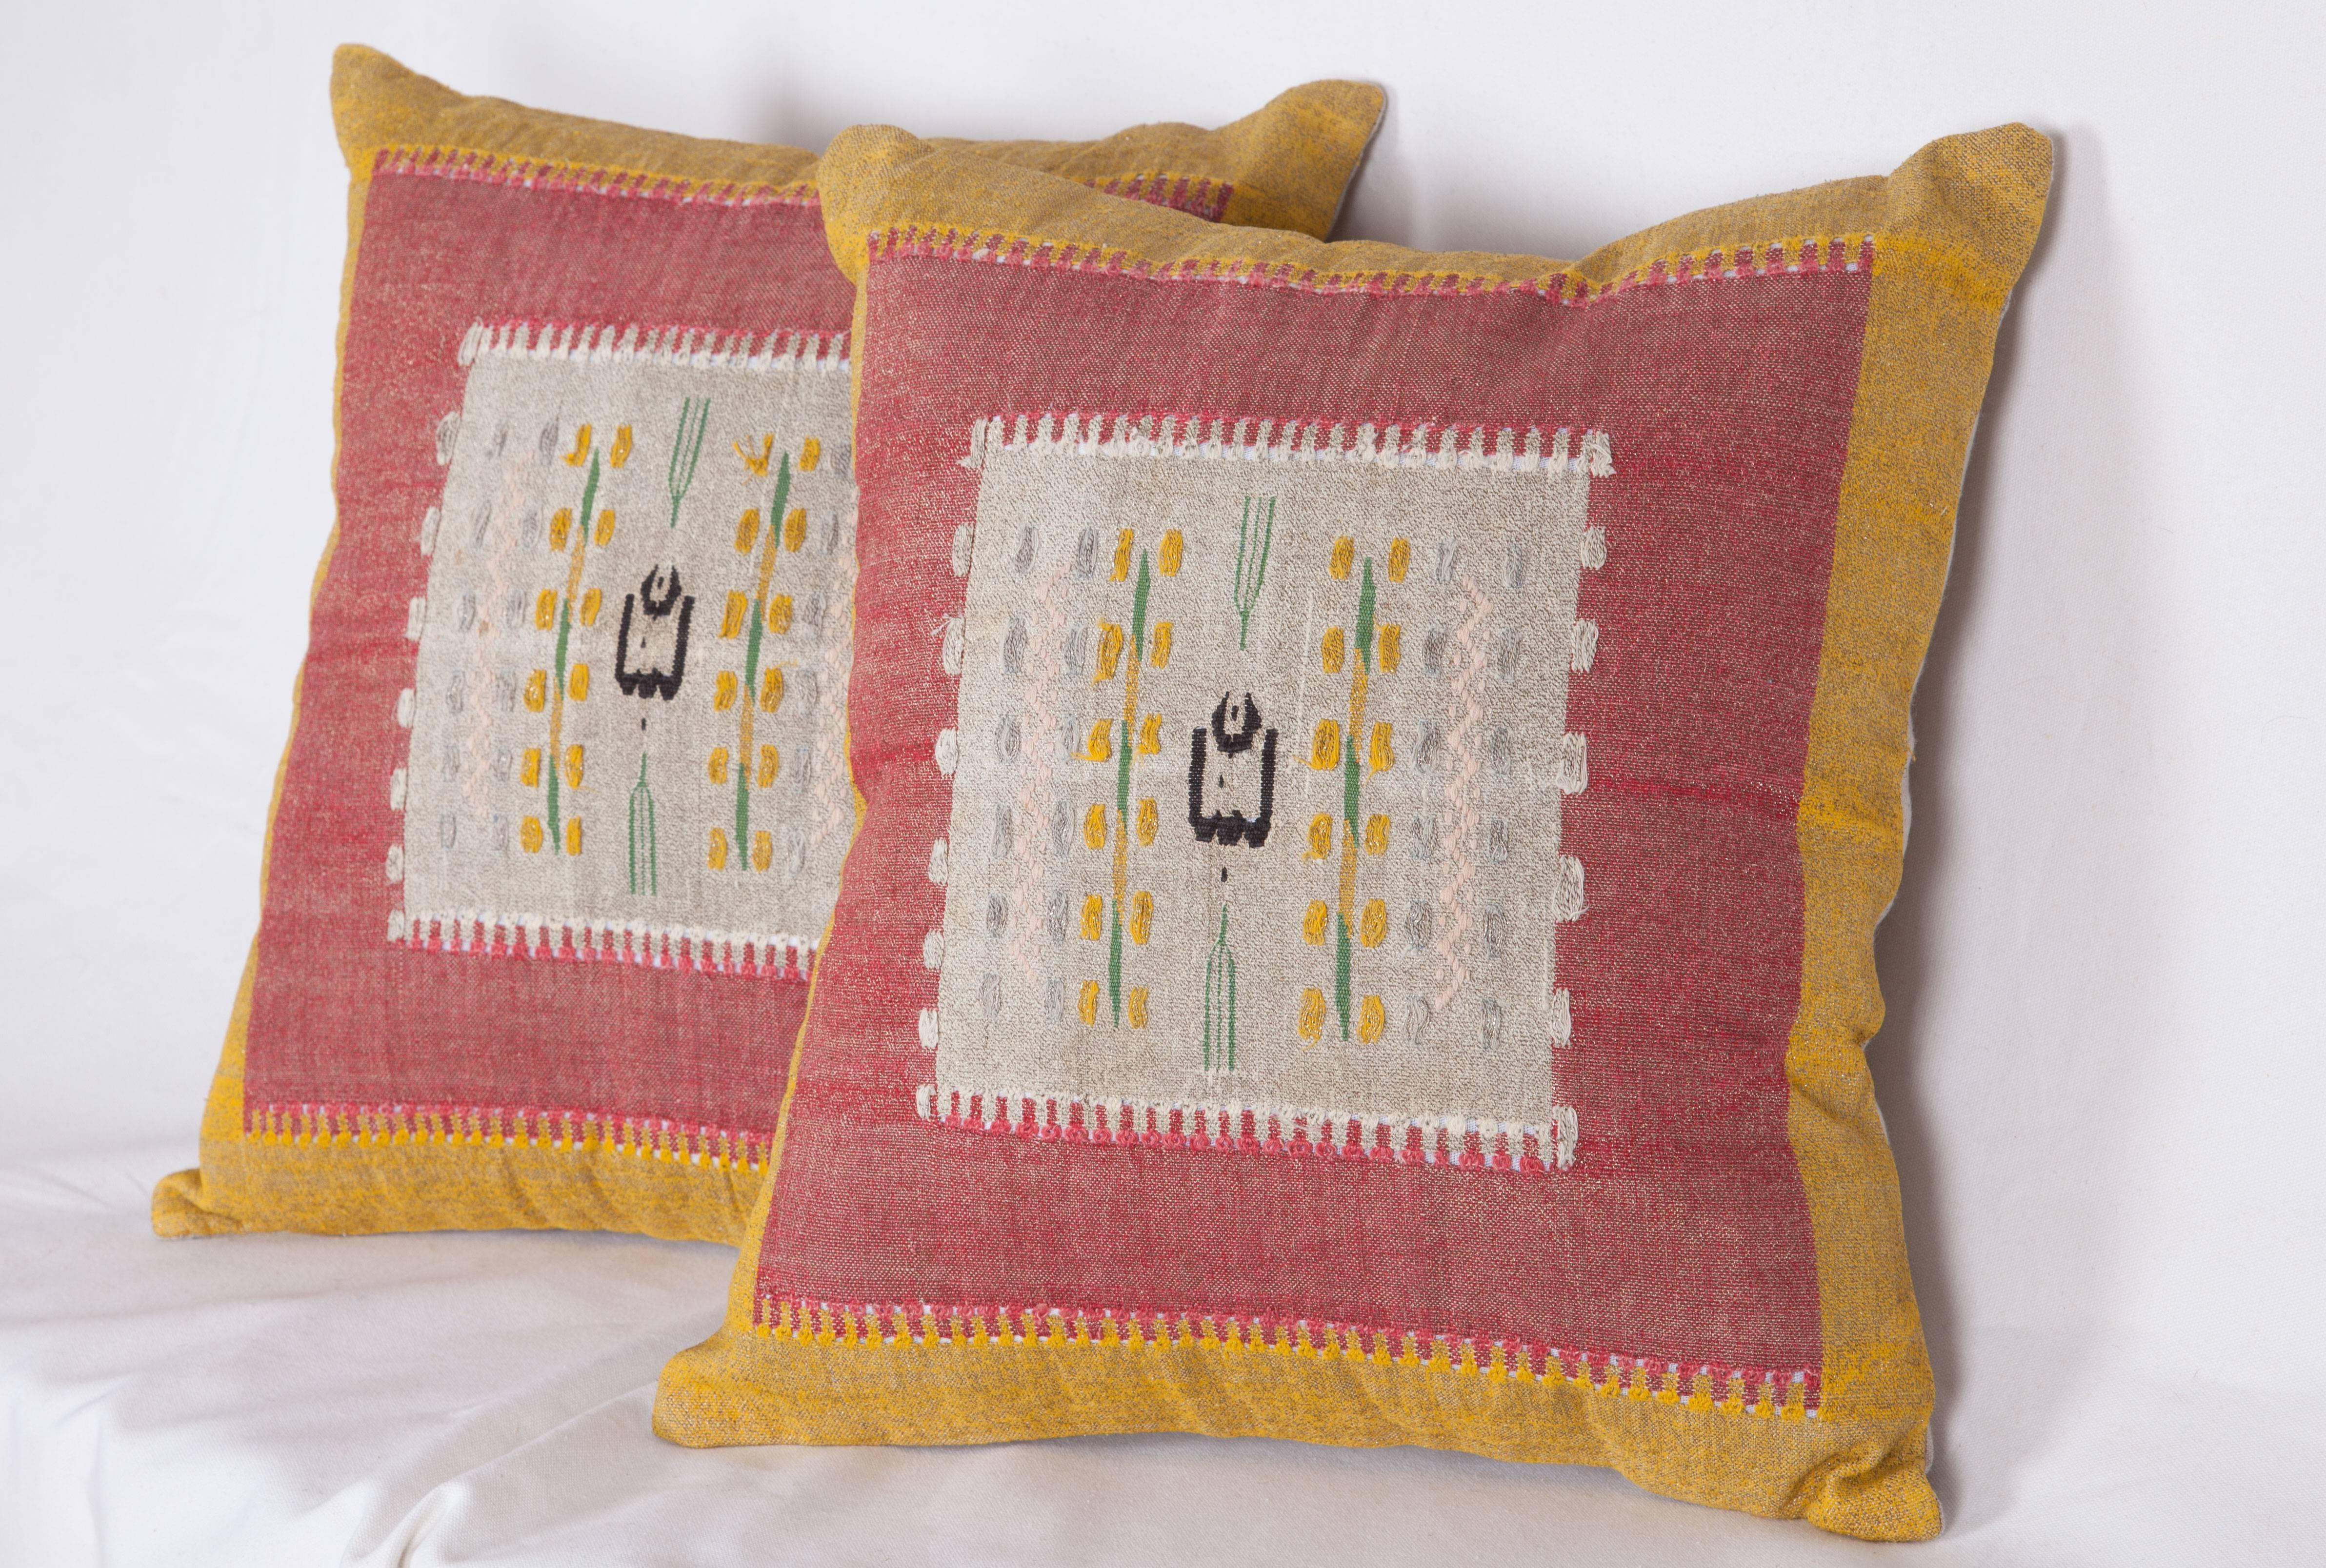 Woven Antique Pillows Made Out of a Middle Eastern Pillow Tops